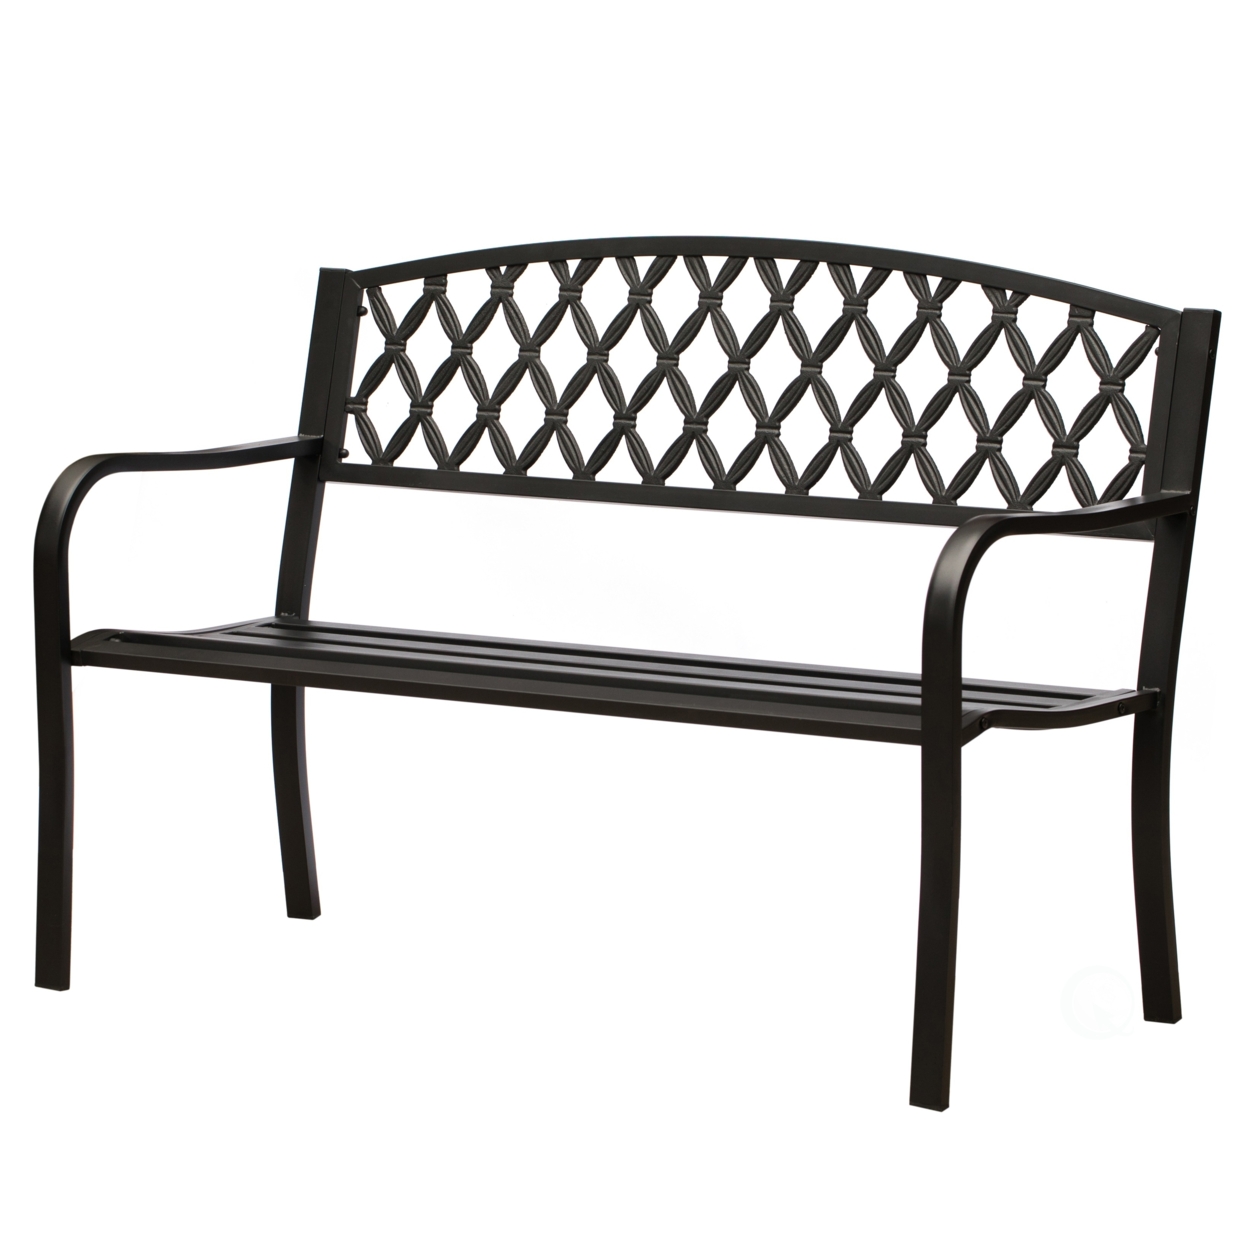 Black Outdoor Garden Patio Steel Park Bench Lawn Decor with Cast Iron Back